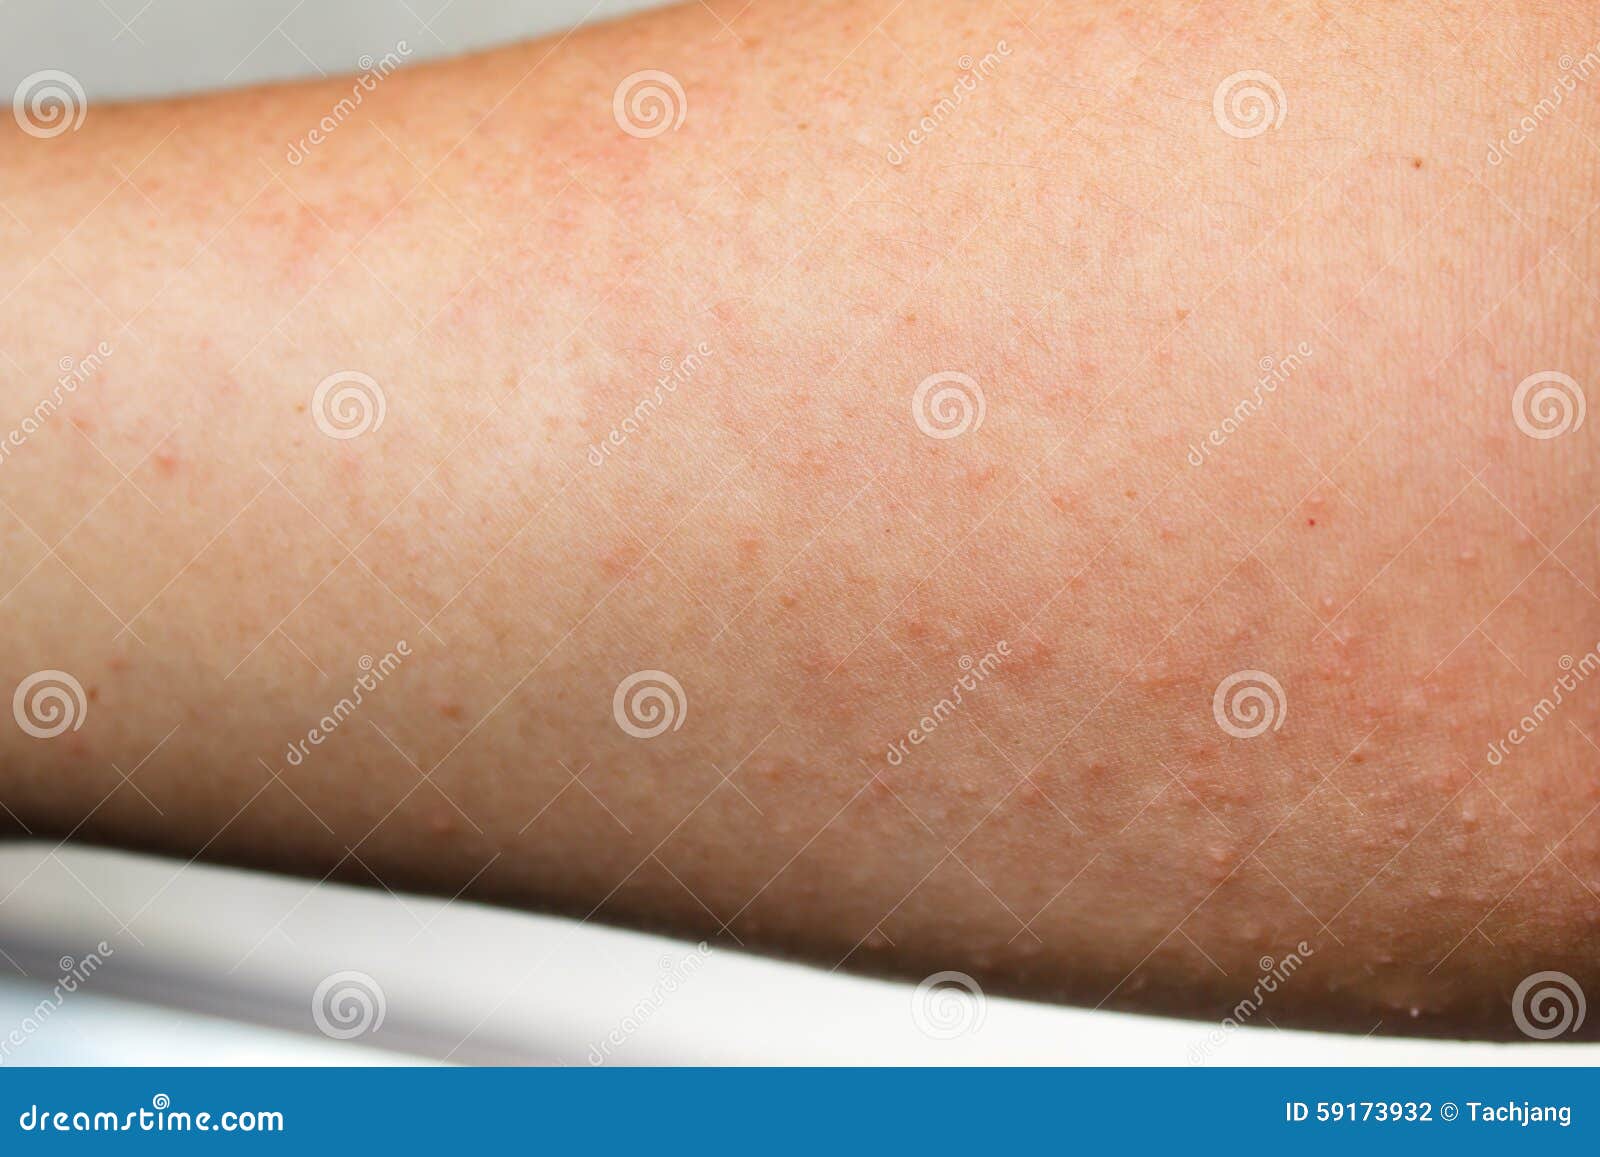 Human Skin Presenting An Allergic Reaction Stock Photo Image Of